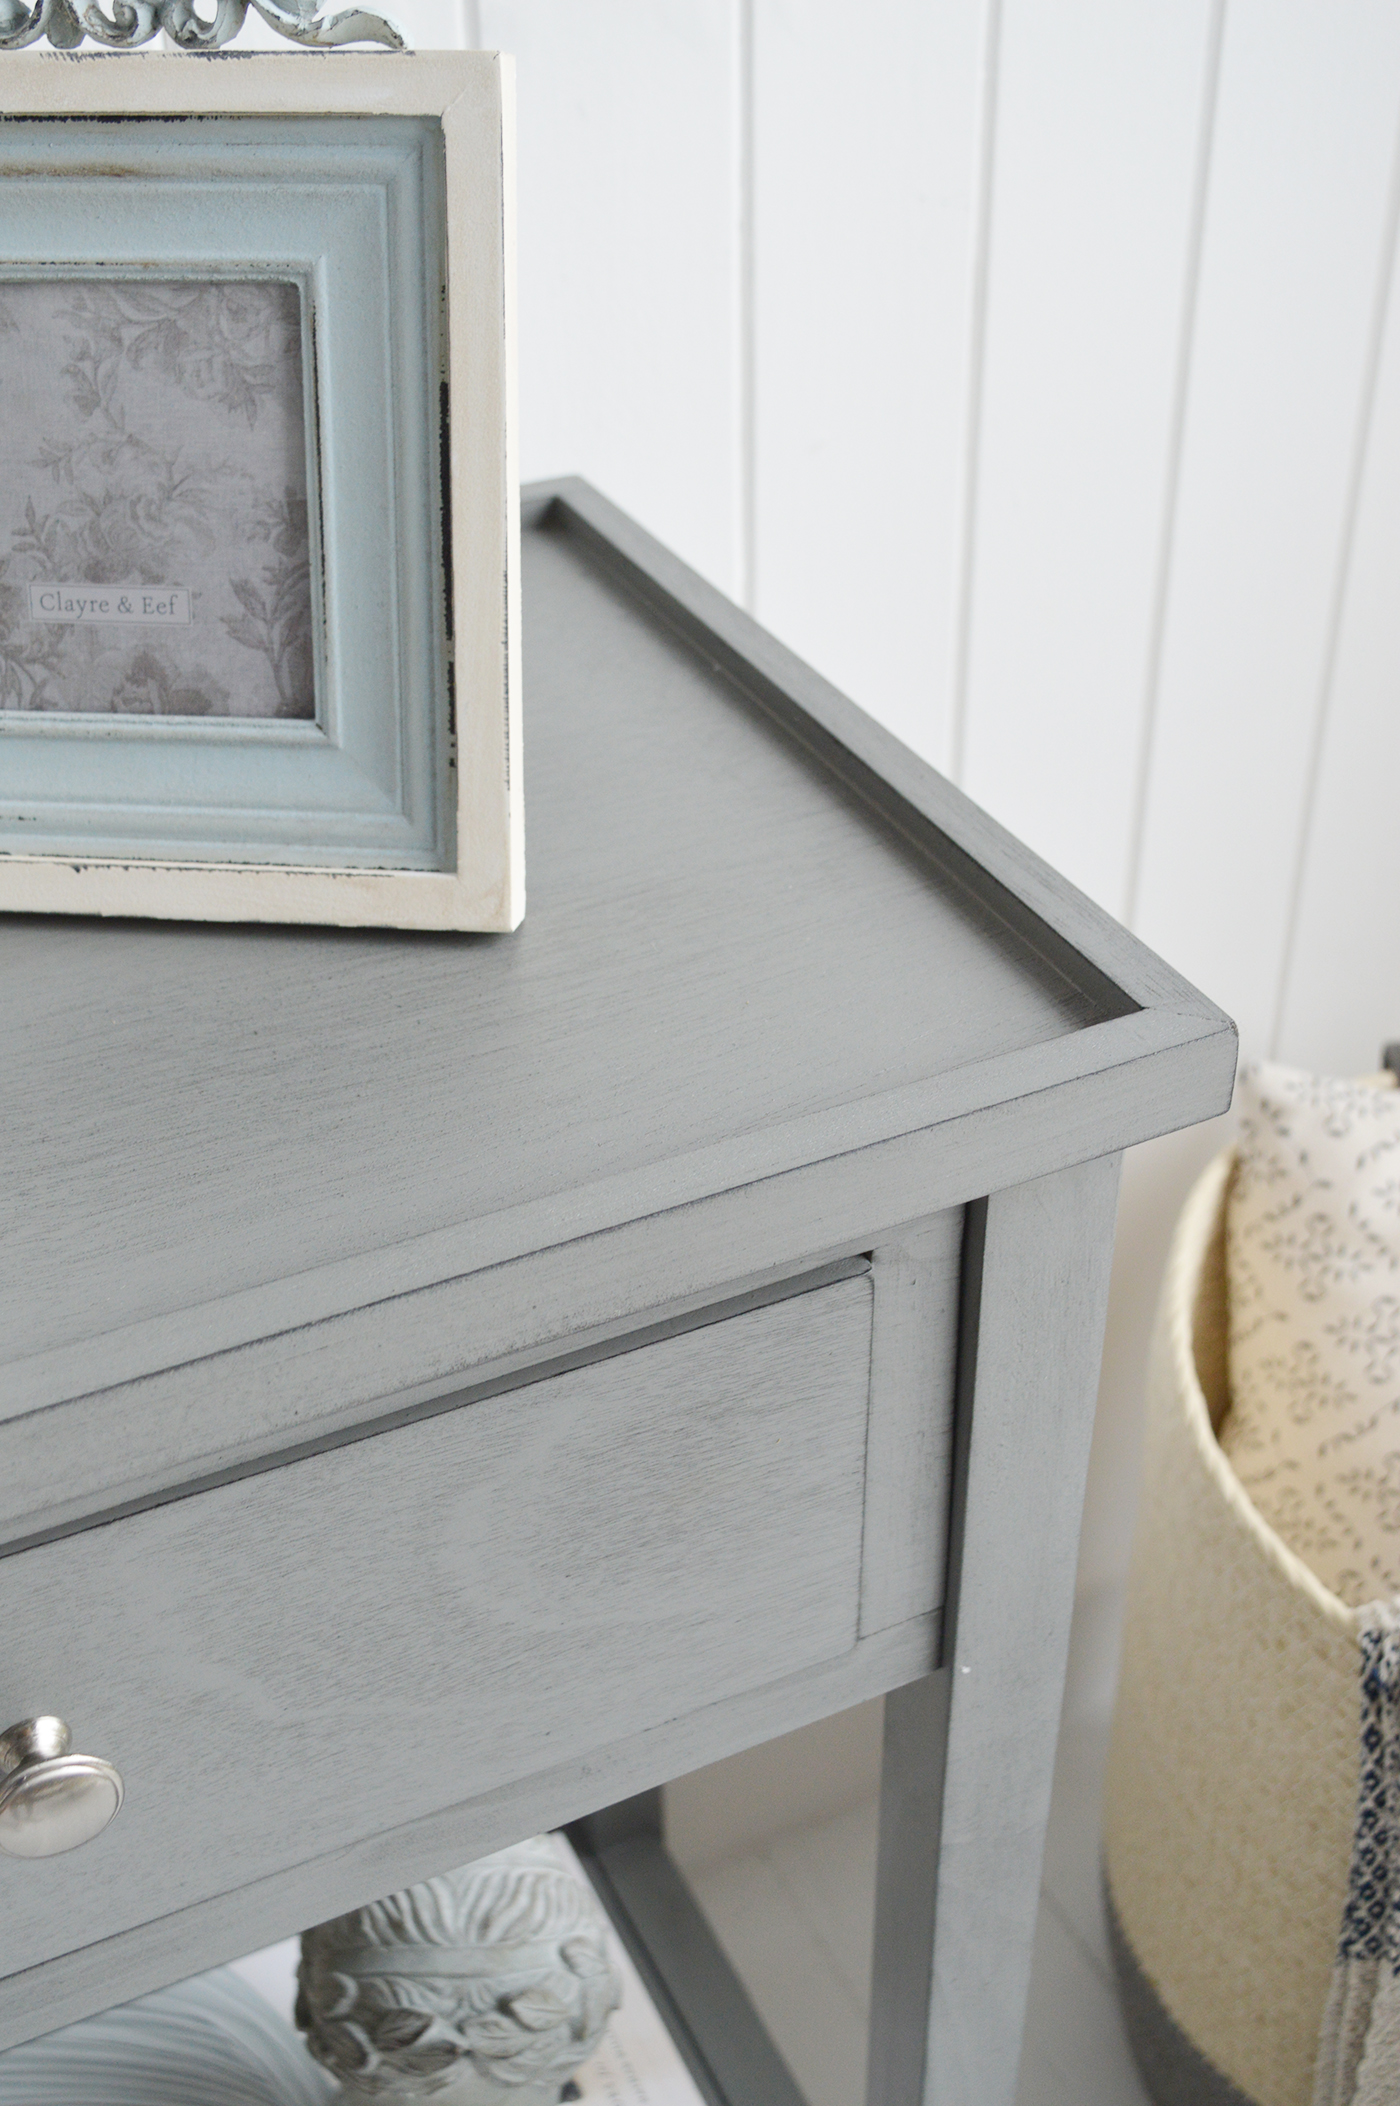 Oxford Grey Console Table with Shelf and Drawers - New England Country, Coastal, City and Farmhouse Furniture. The White Lighthouse Hallway Furniture